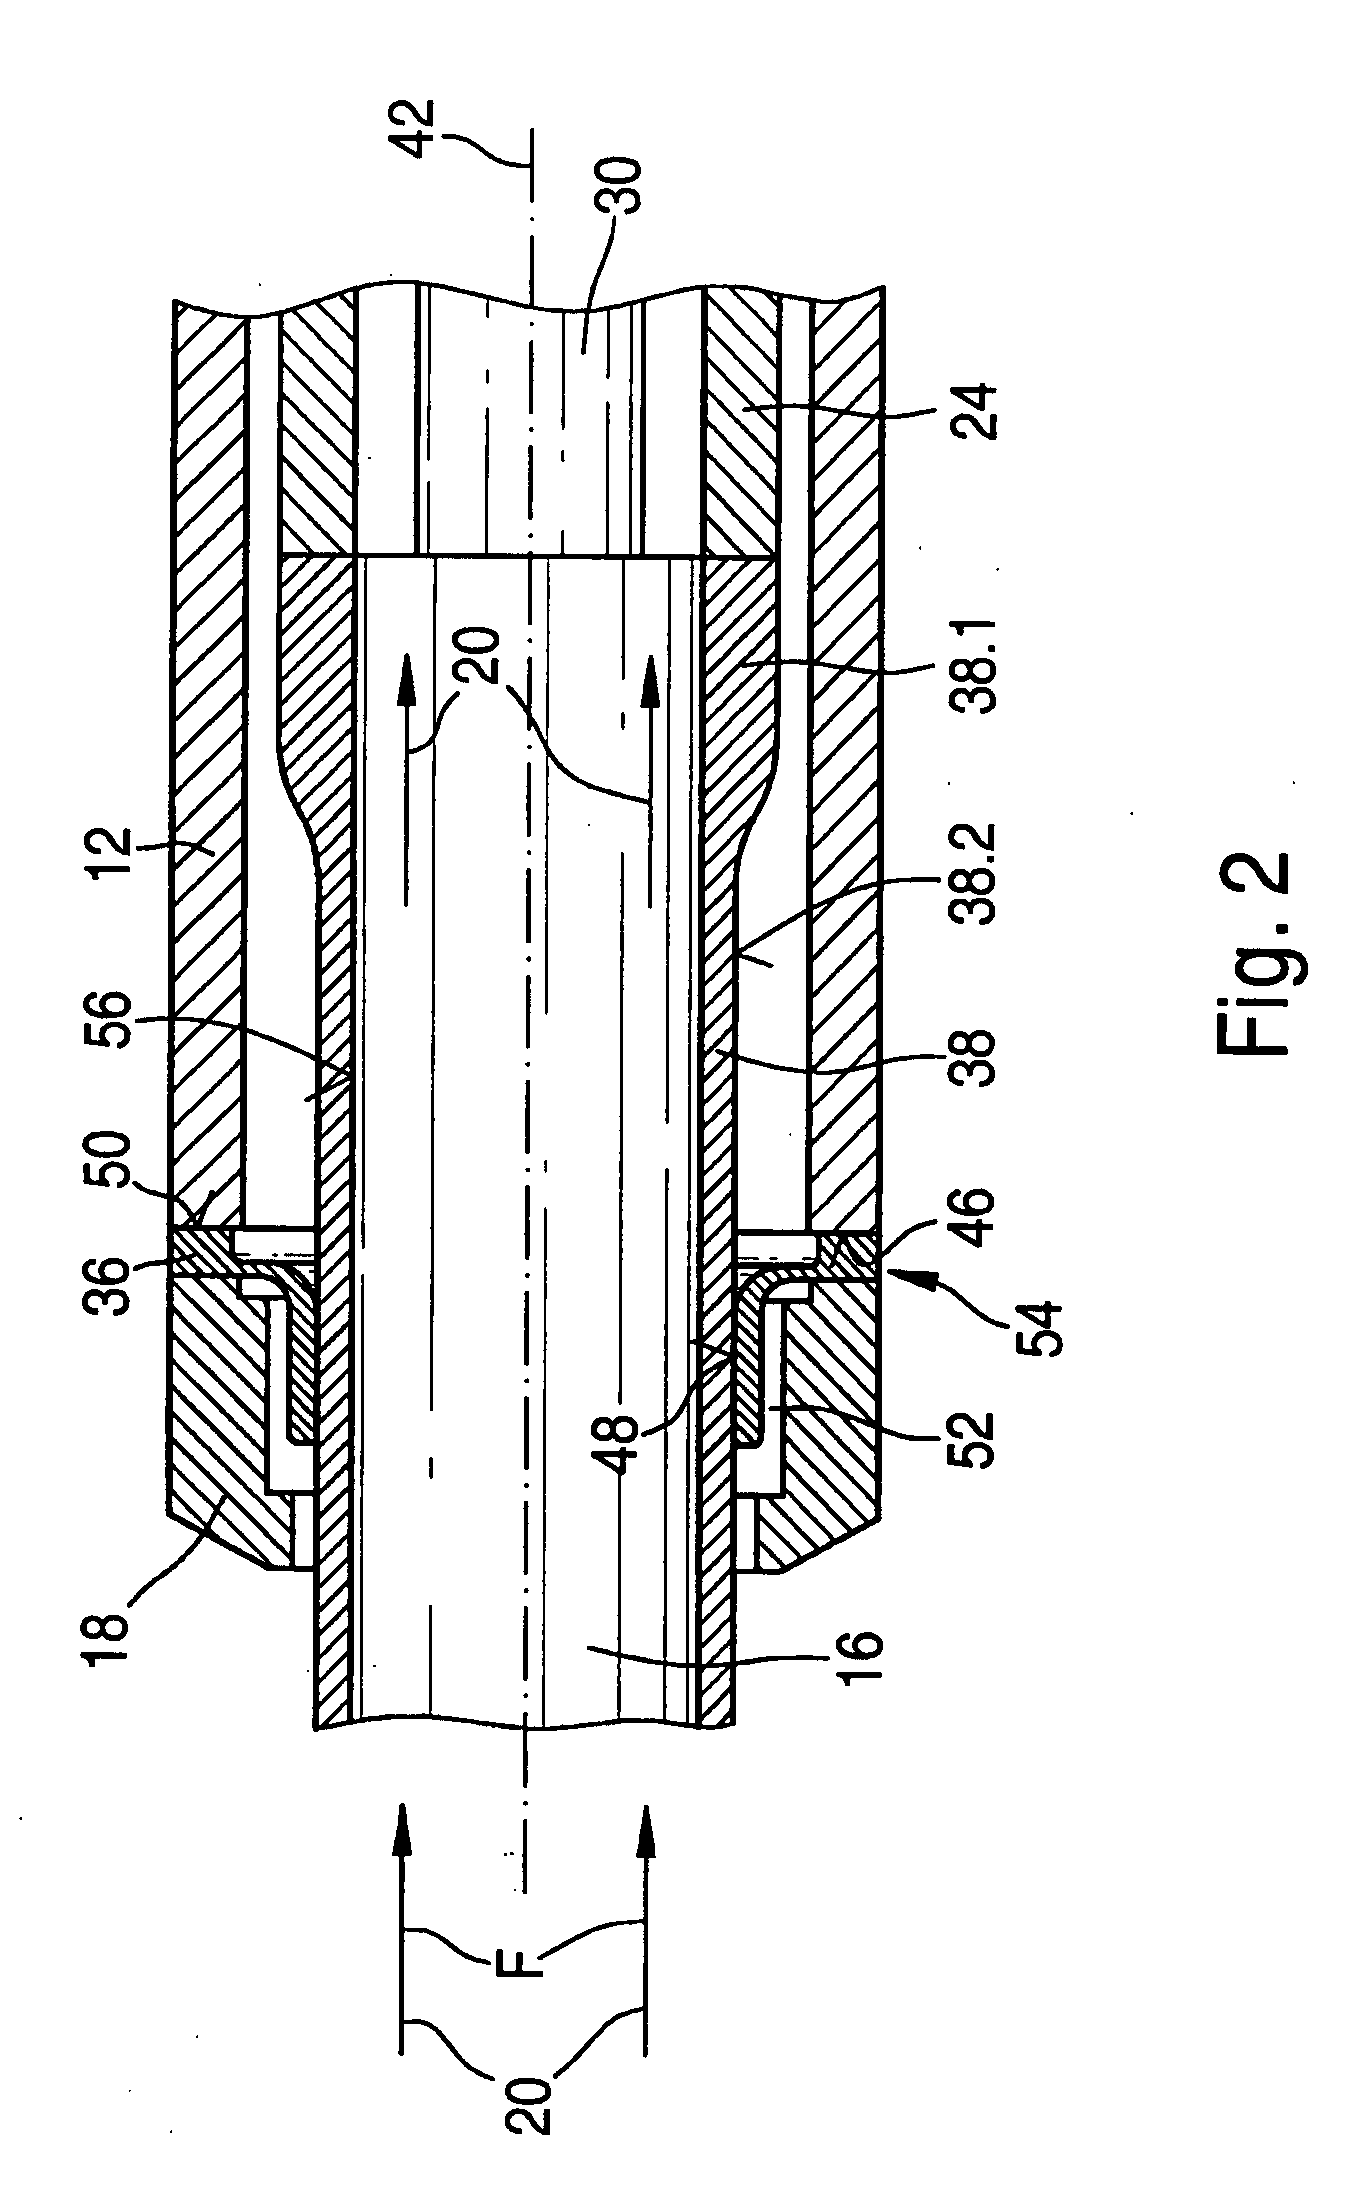 Pencil-Type Glow Plug Having an Integrated Combustion Chamber Pressure Sensor